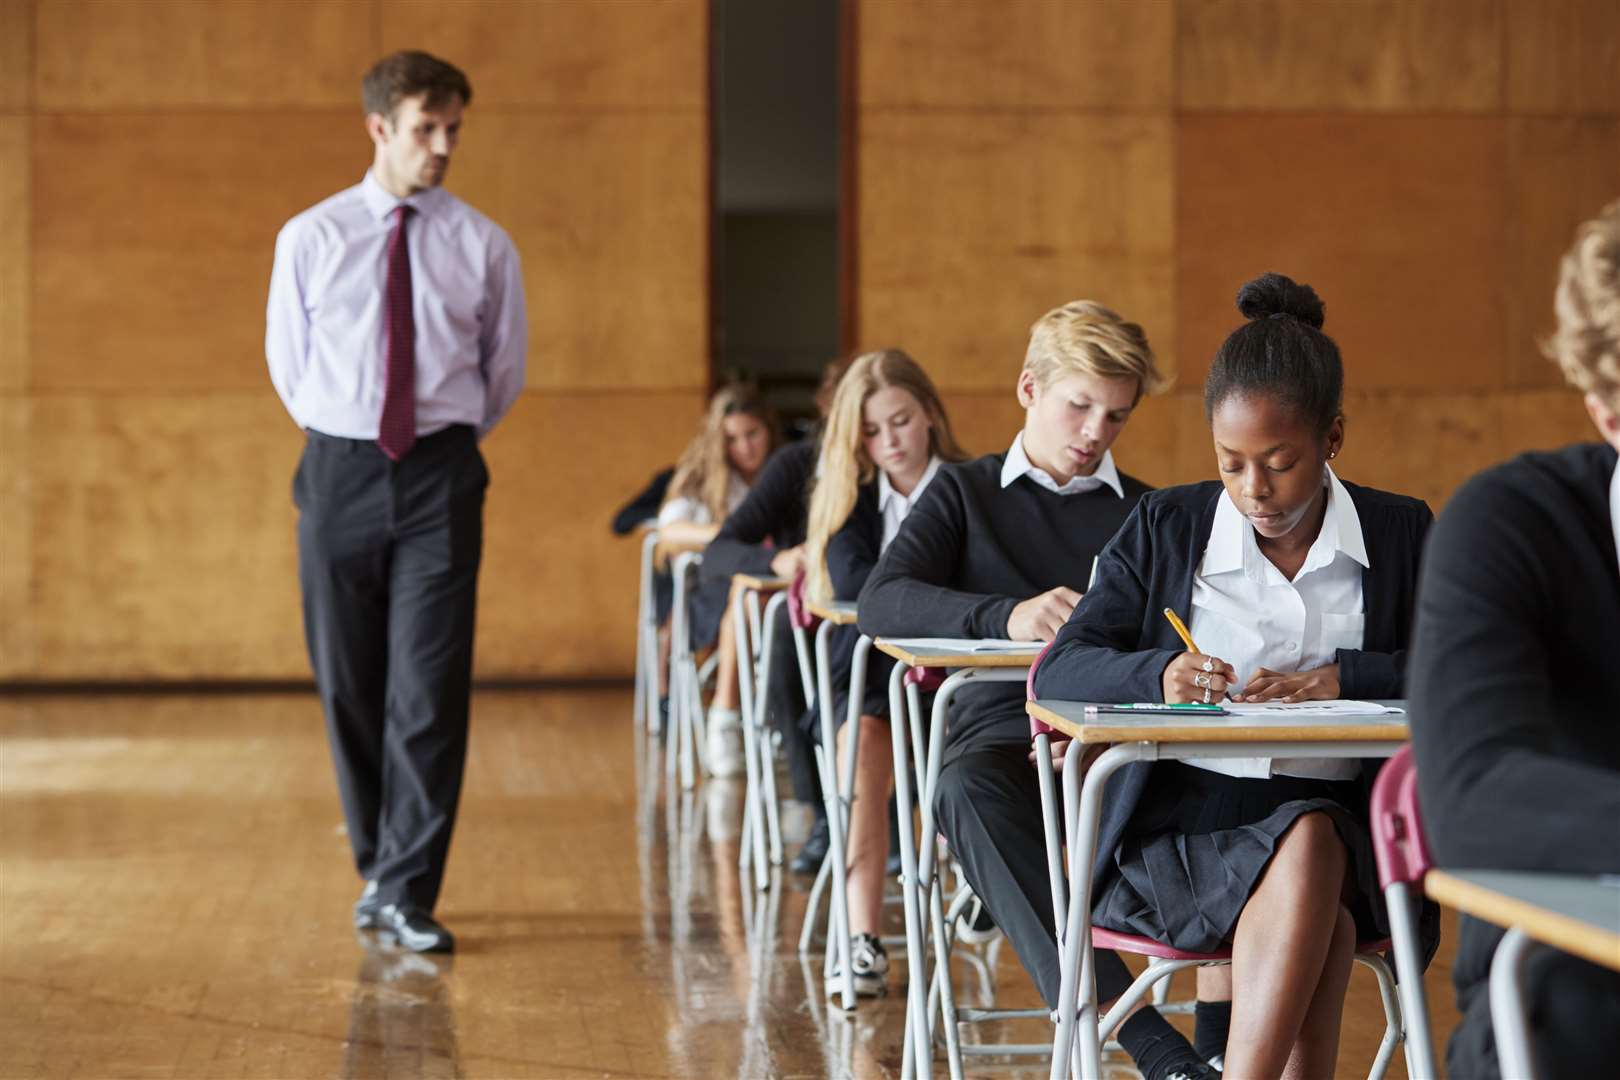 Secondary school offer day earmarks places for thousands of future secondary school students. Image: Stock photo.